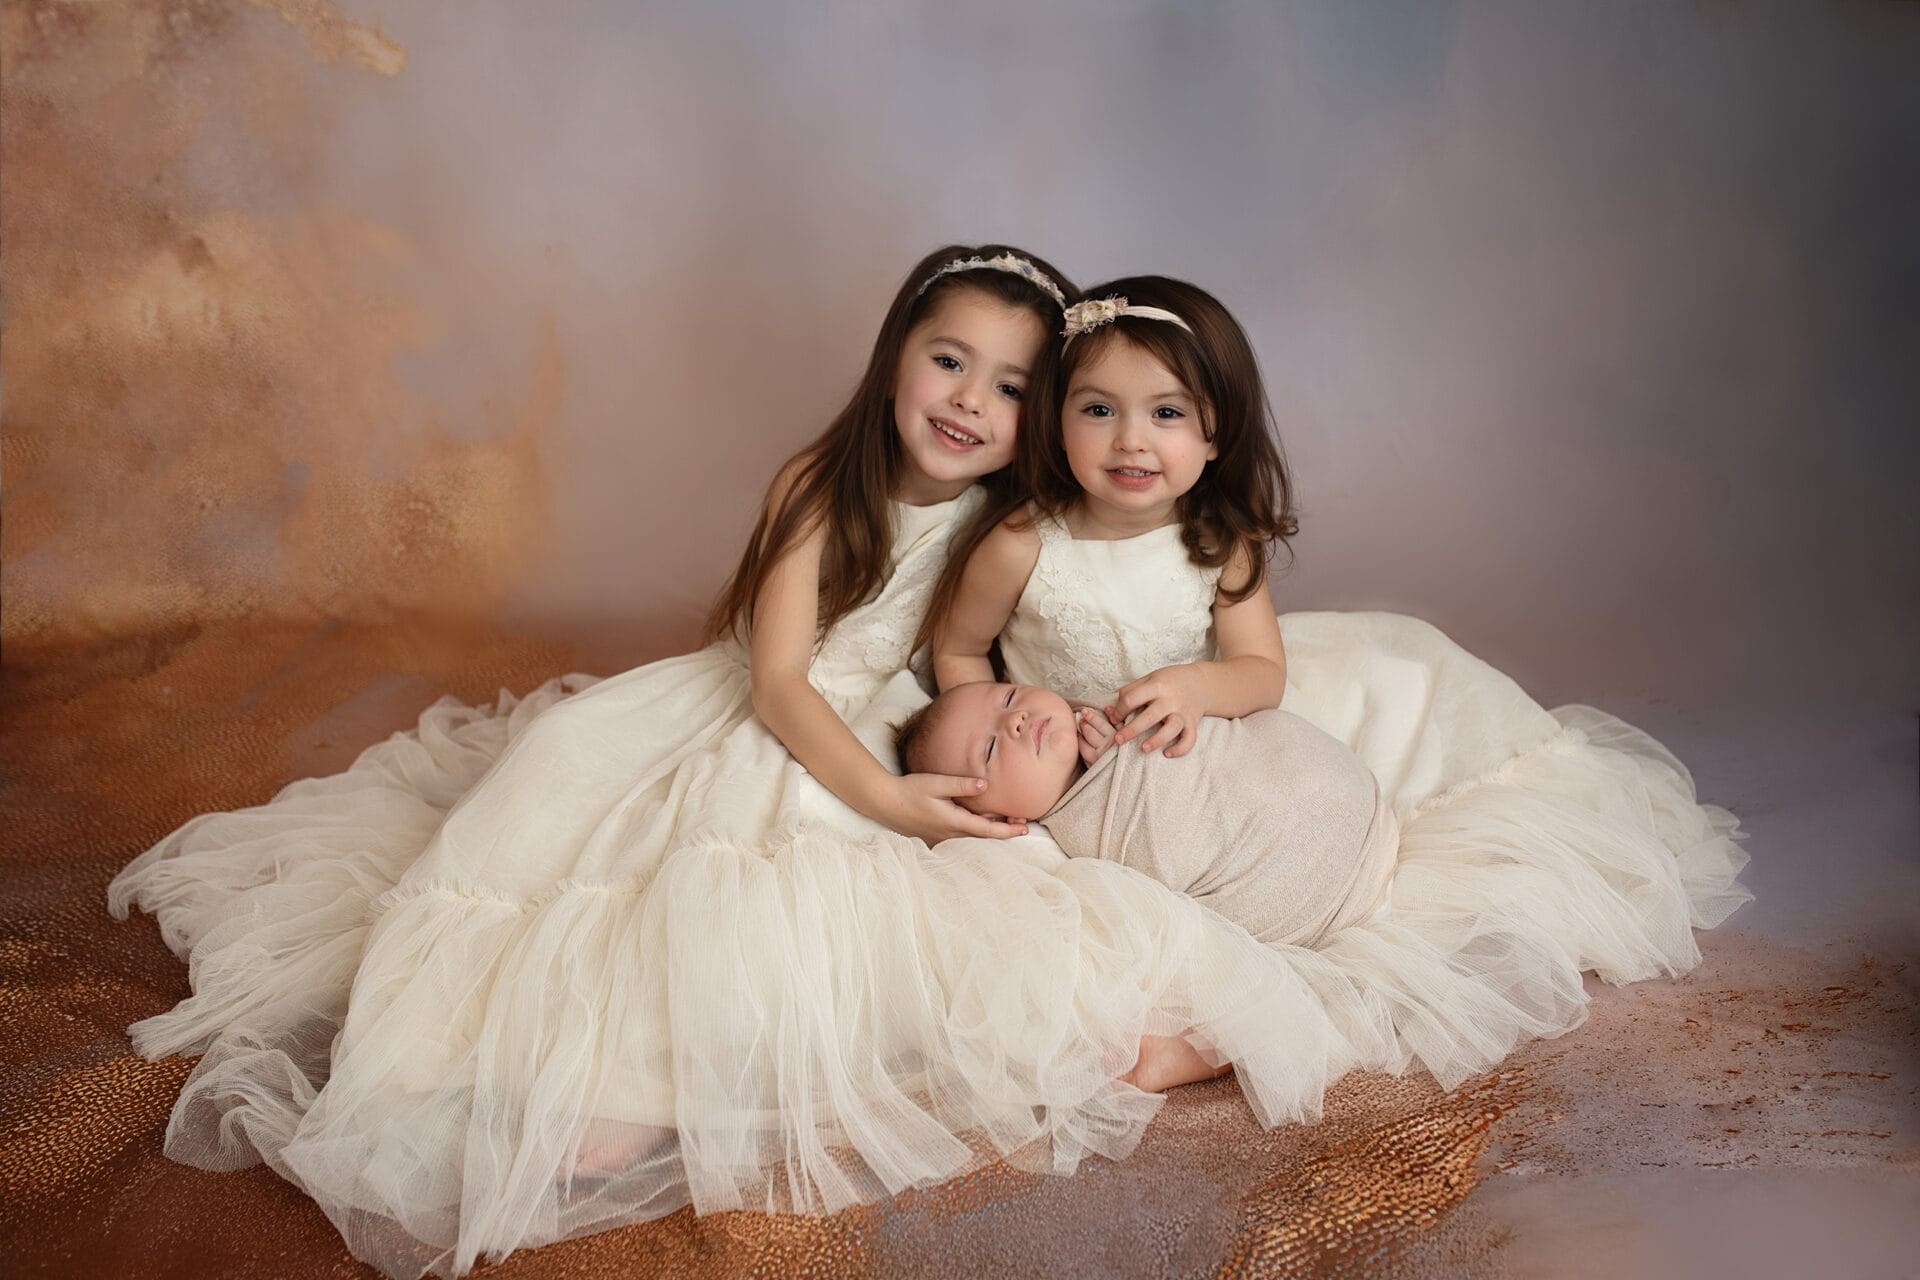 Two toddler sisters in matching white dresses sit in a studio with their sleeping newborn sibling in their lap